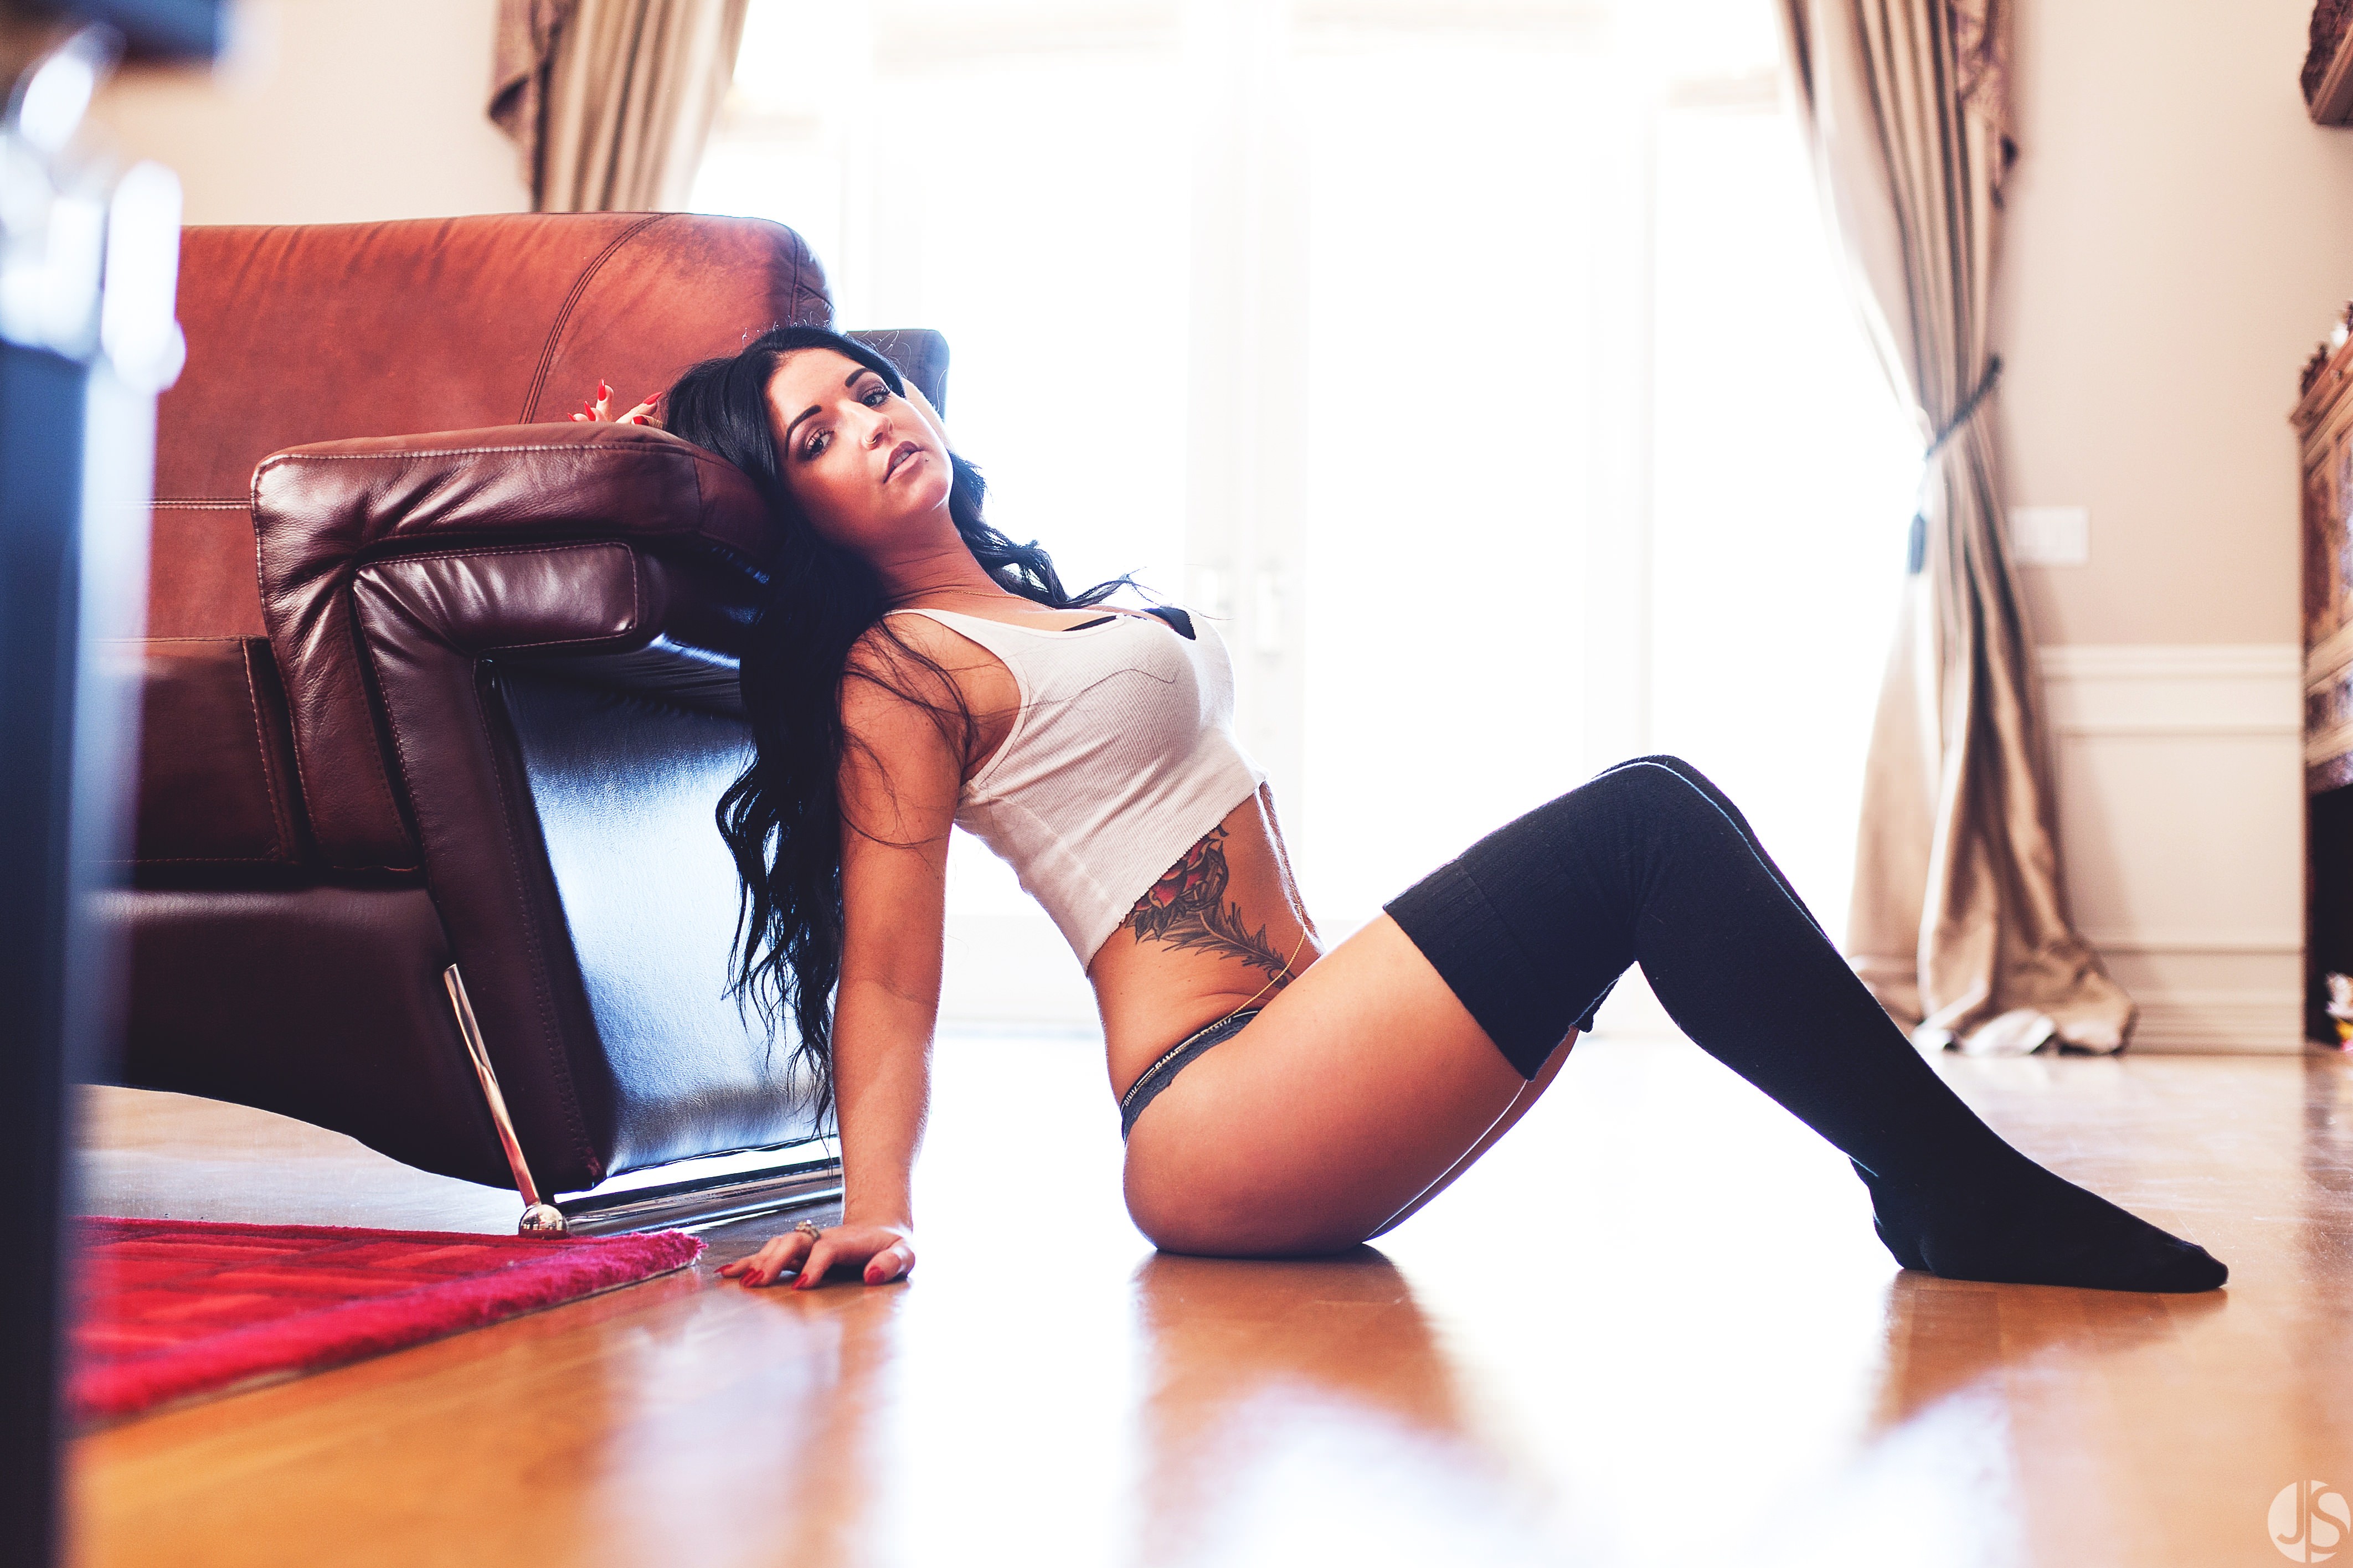 People 4249x2832 women model sitting tattoo white tops curvy socks black socks  thigh high socks bent legs legs together crop top bare midriff watermarked on the floor women indoors inked girls black hair wooden surface overexposed